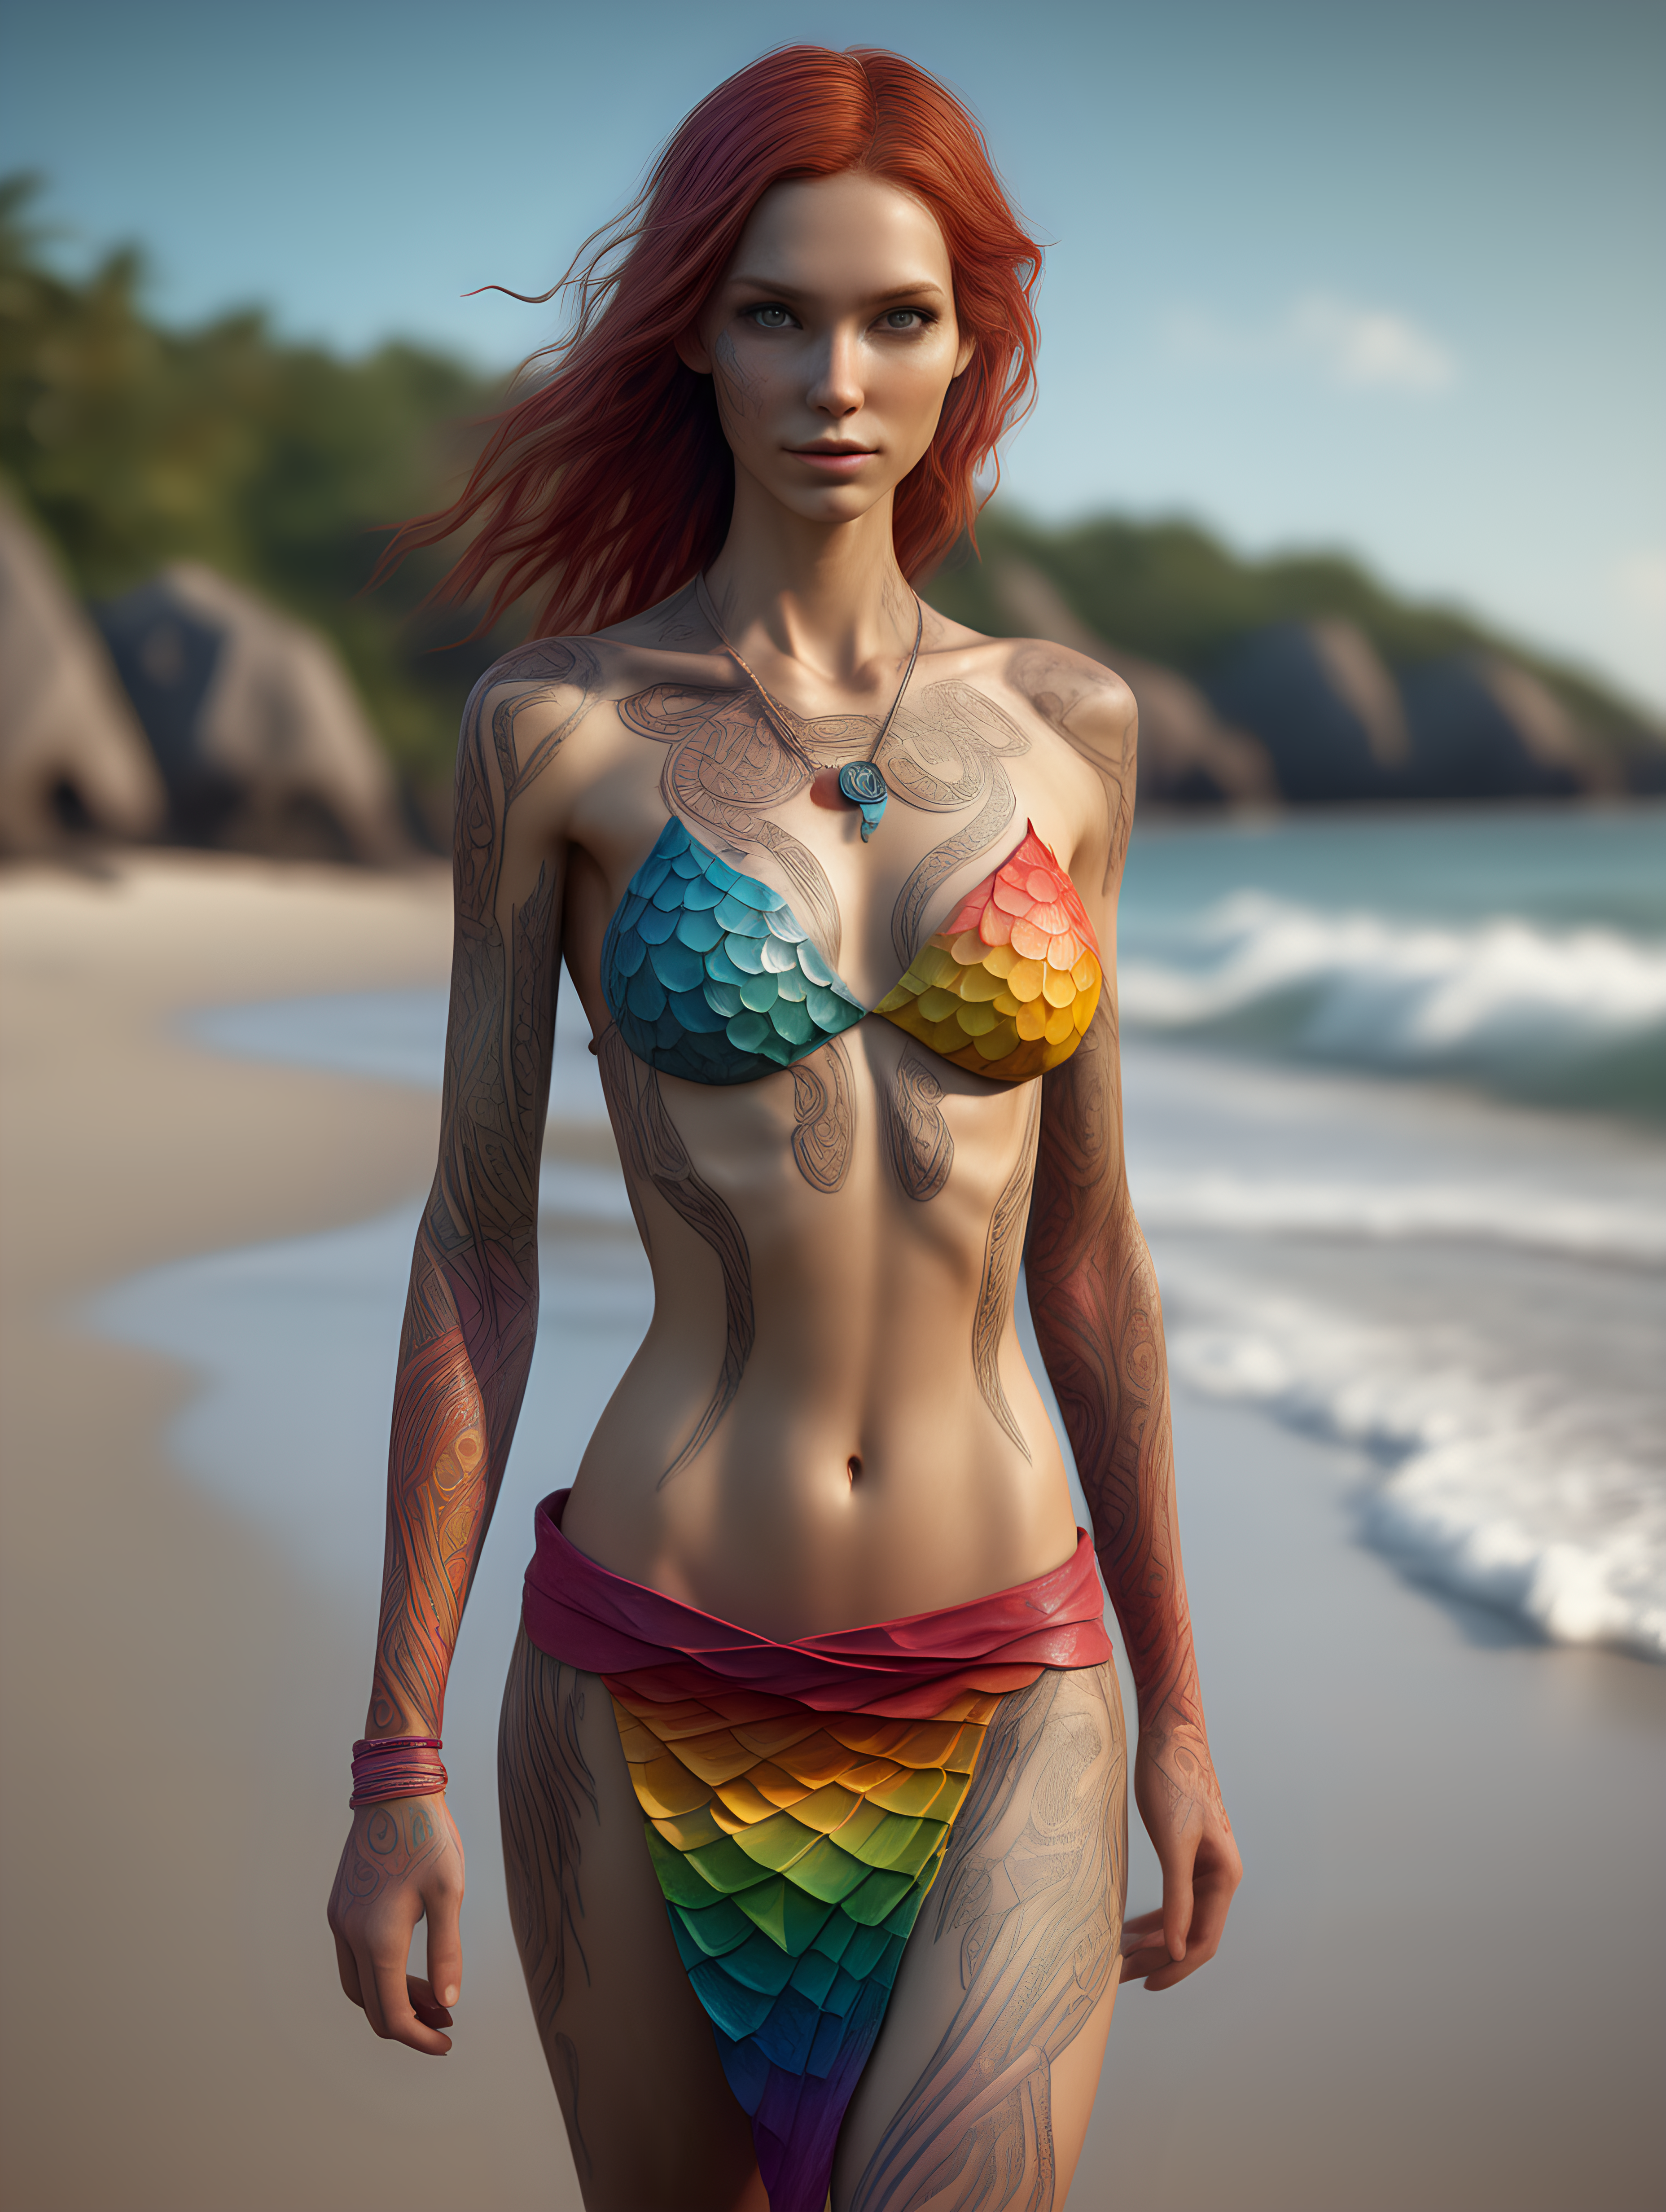 ultra-realistic high resolution and highly detailed photo of a slender female human, draconic runes carved into her skin, scales growing on her arms and body, wearing a colourful bikini top and loose skirt, walking on a beach facing the camera